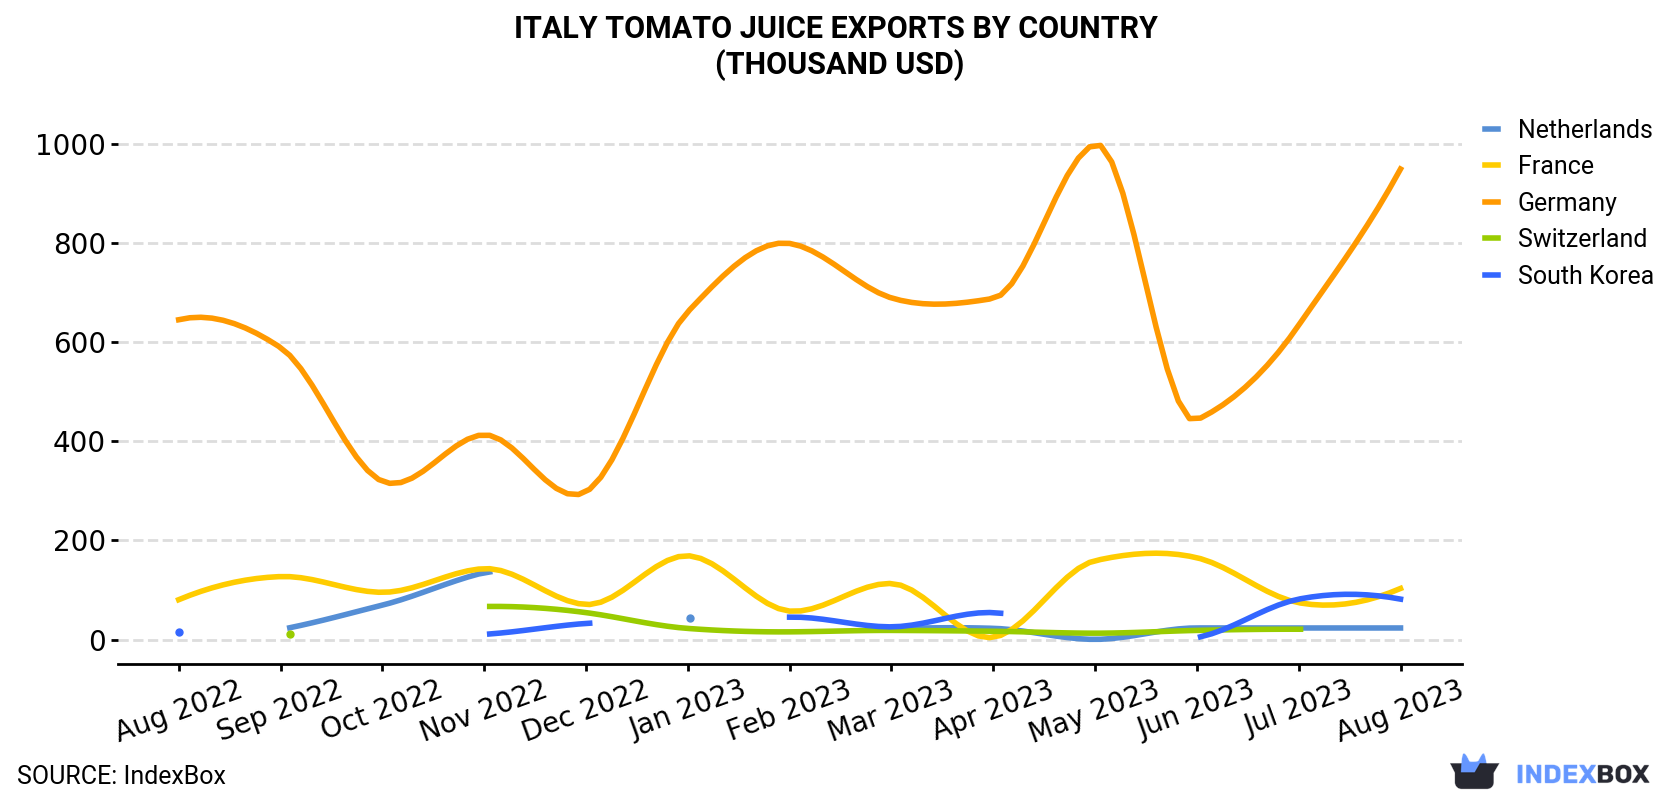 Italy Tomato Juice Exports By Country (Thousand USD)